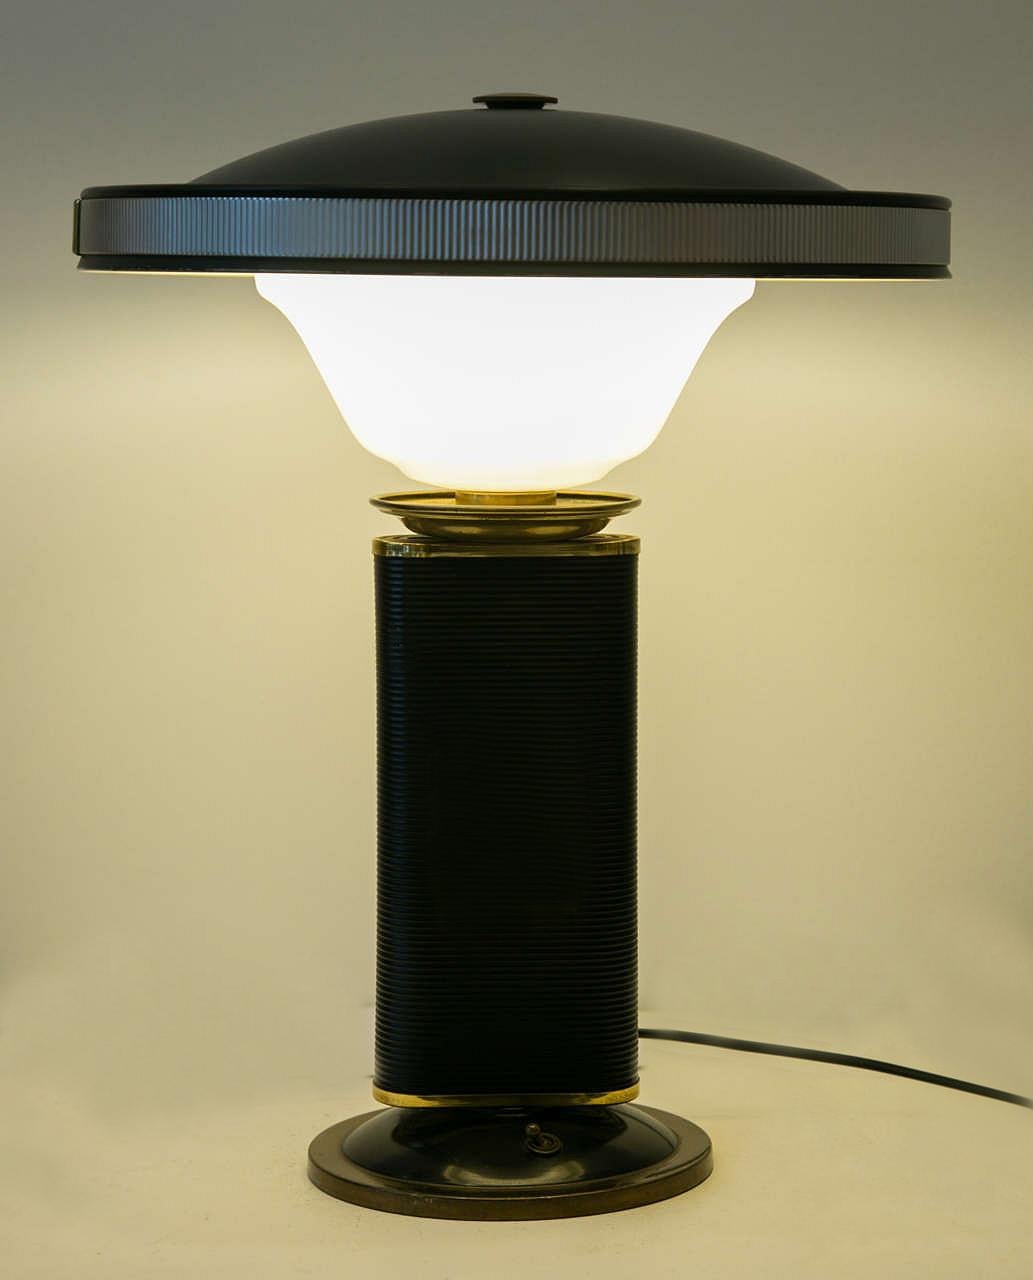 20th Century Iconic Eileen Gray Table Lamp by Jumo, circa 1950